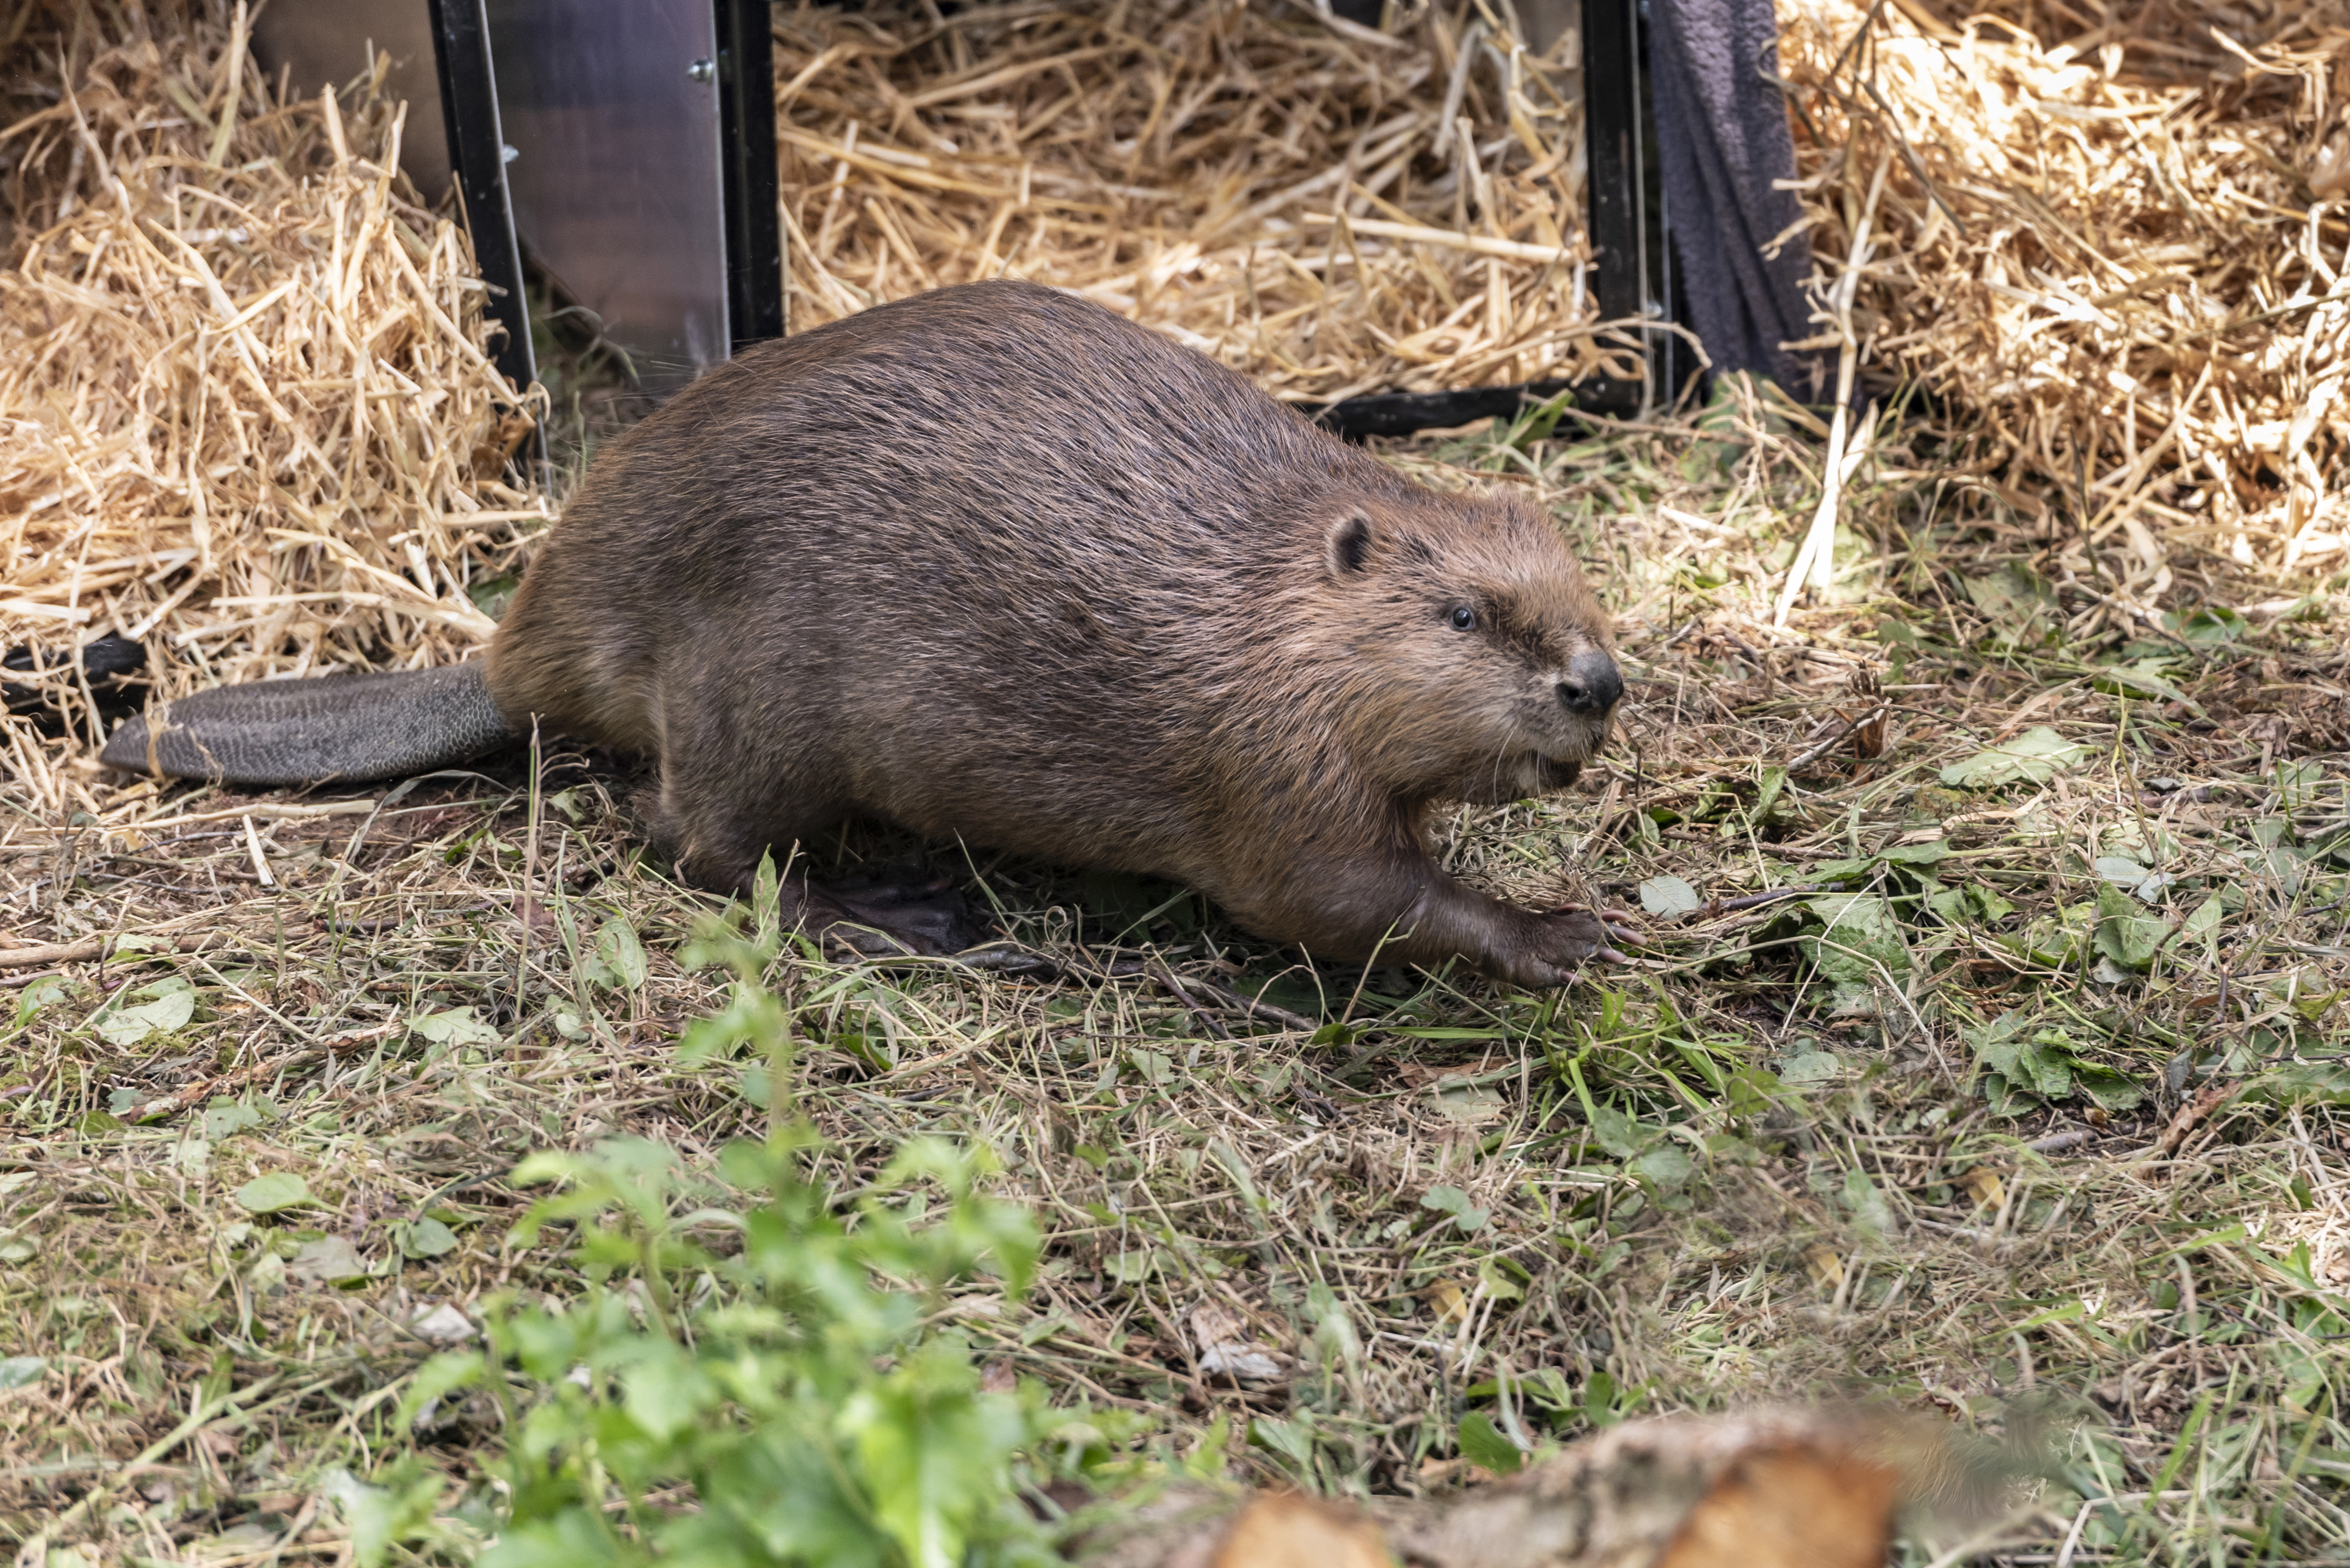 One of the beavers during the release on the Wallington estate last year